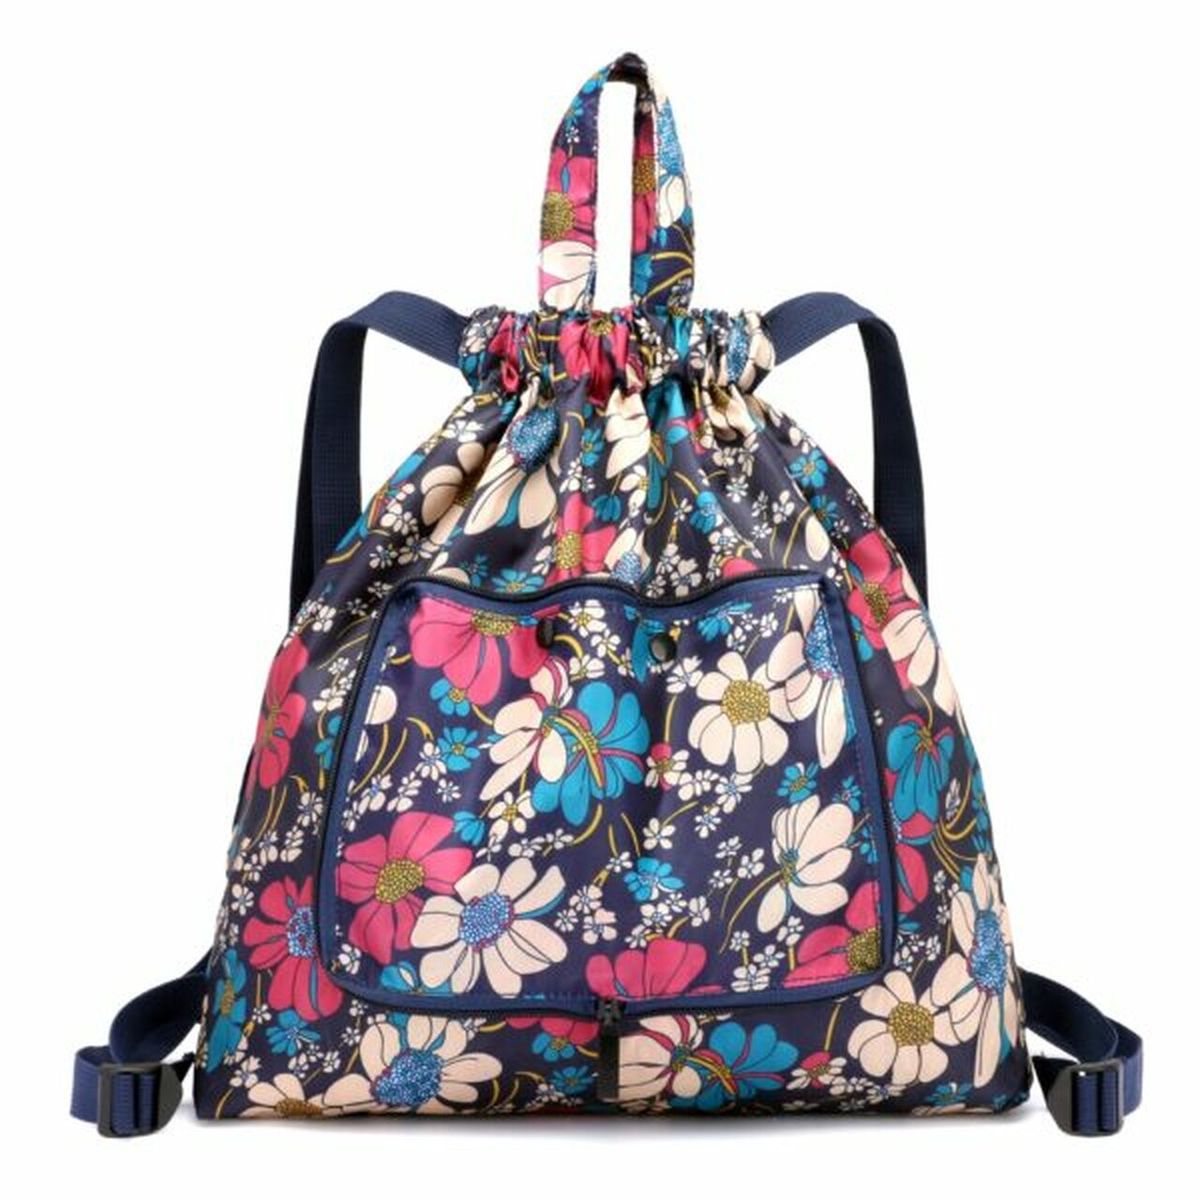 Large Foldable Drawstring Backpack - Multi-colored | Shop Today. Get it ...